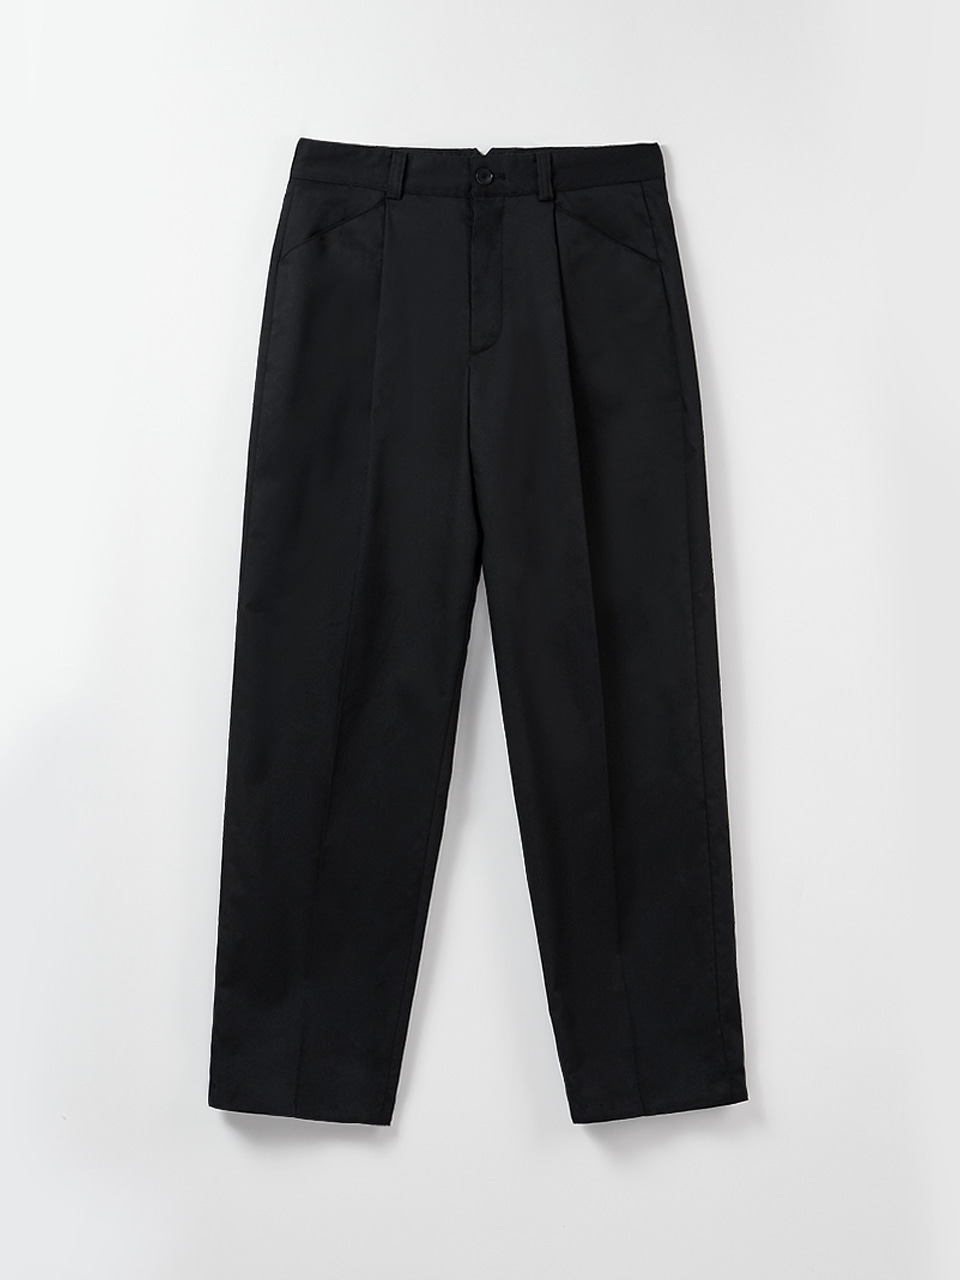 Cotton Relaxed Pants (Black)